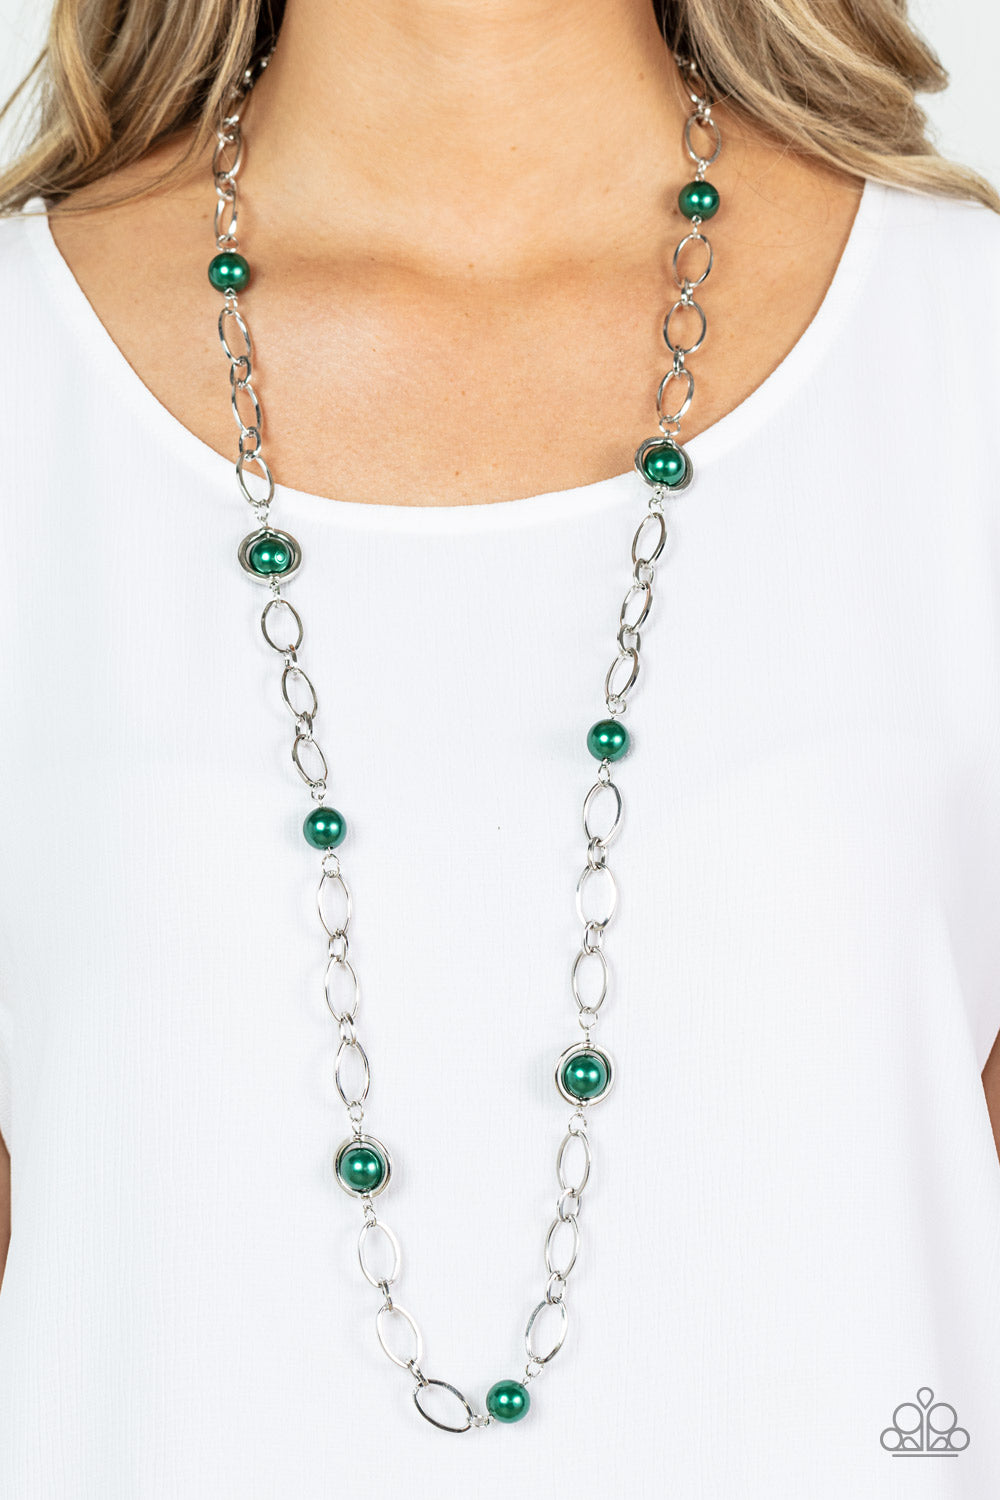 Paparazzi Accessories Fundamental Fashion - Green Necklace & Earrings